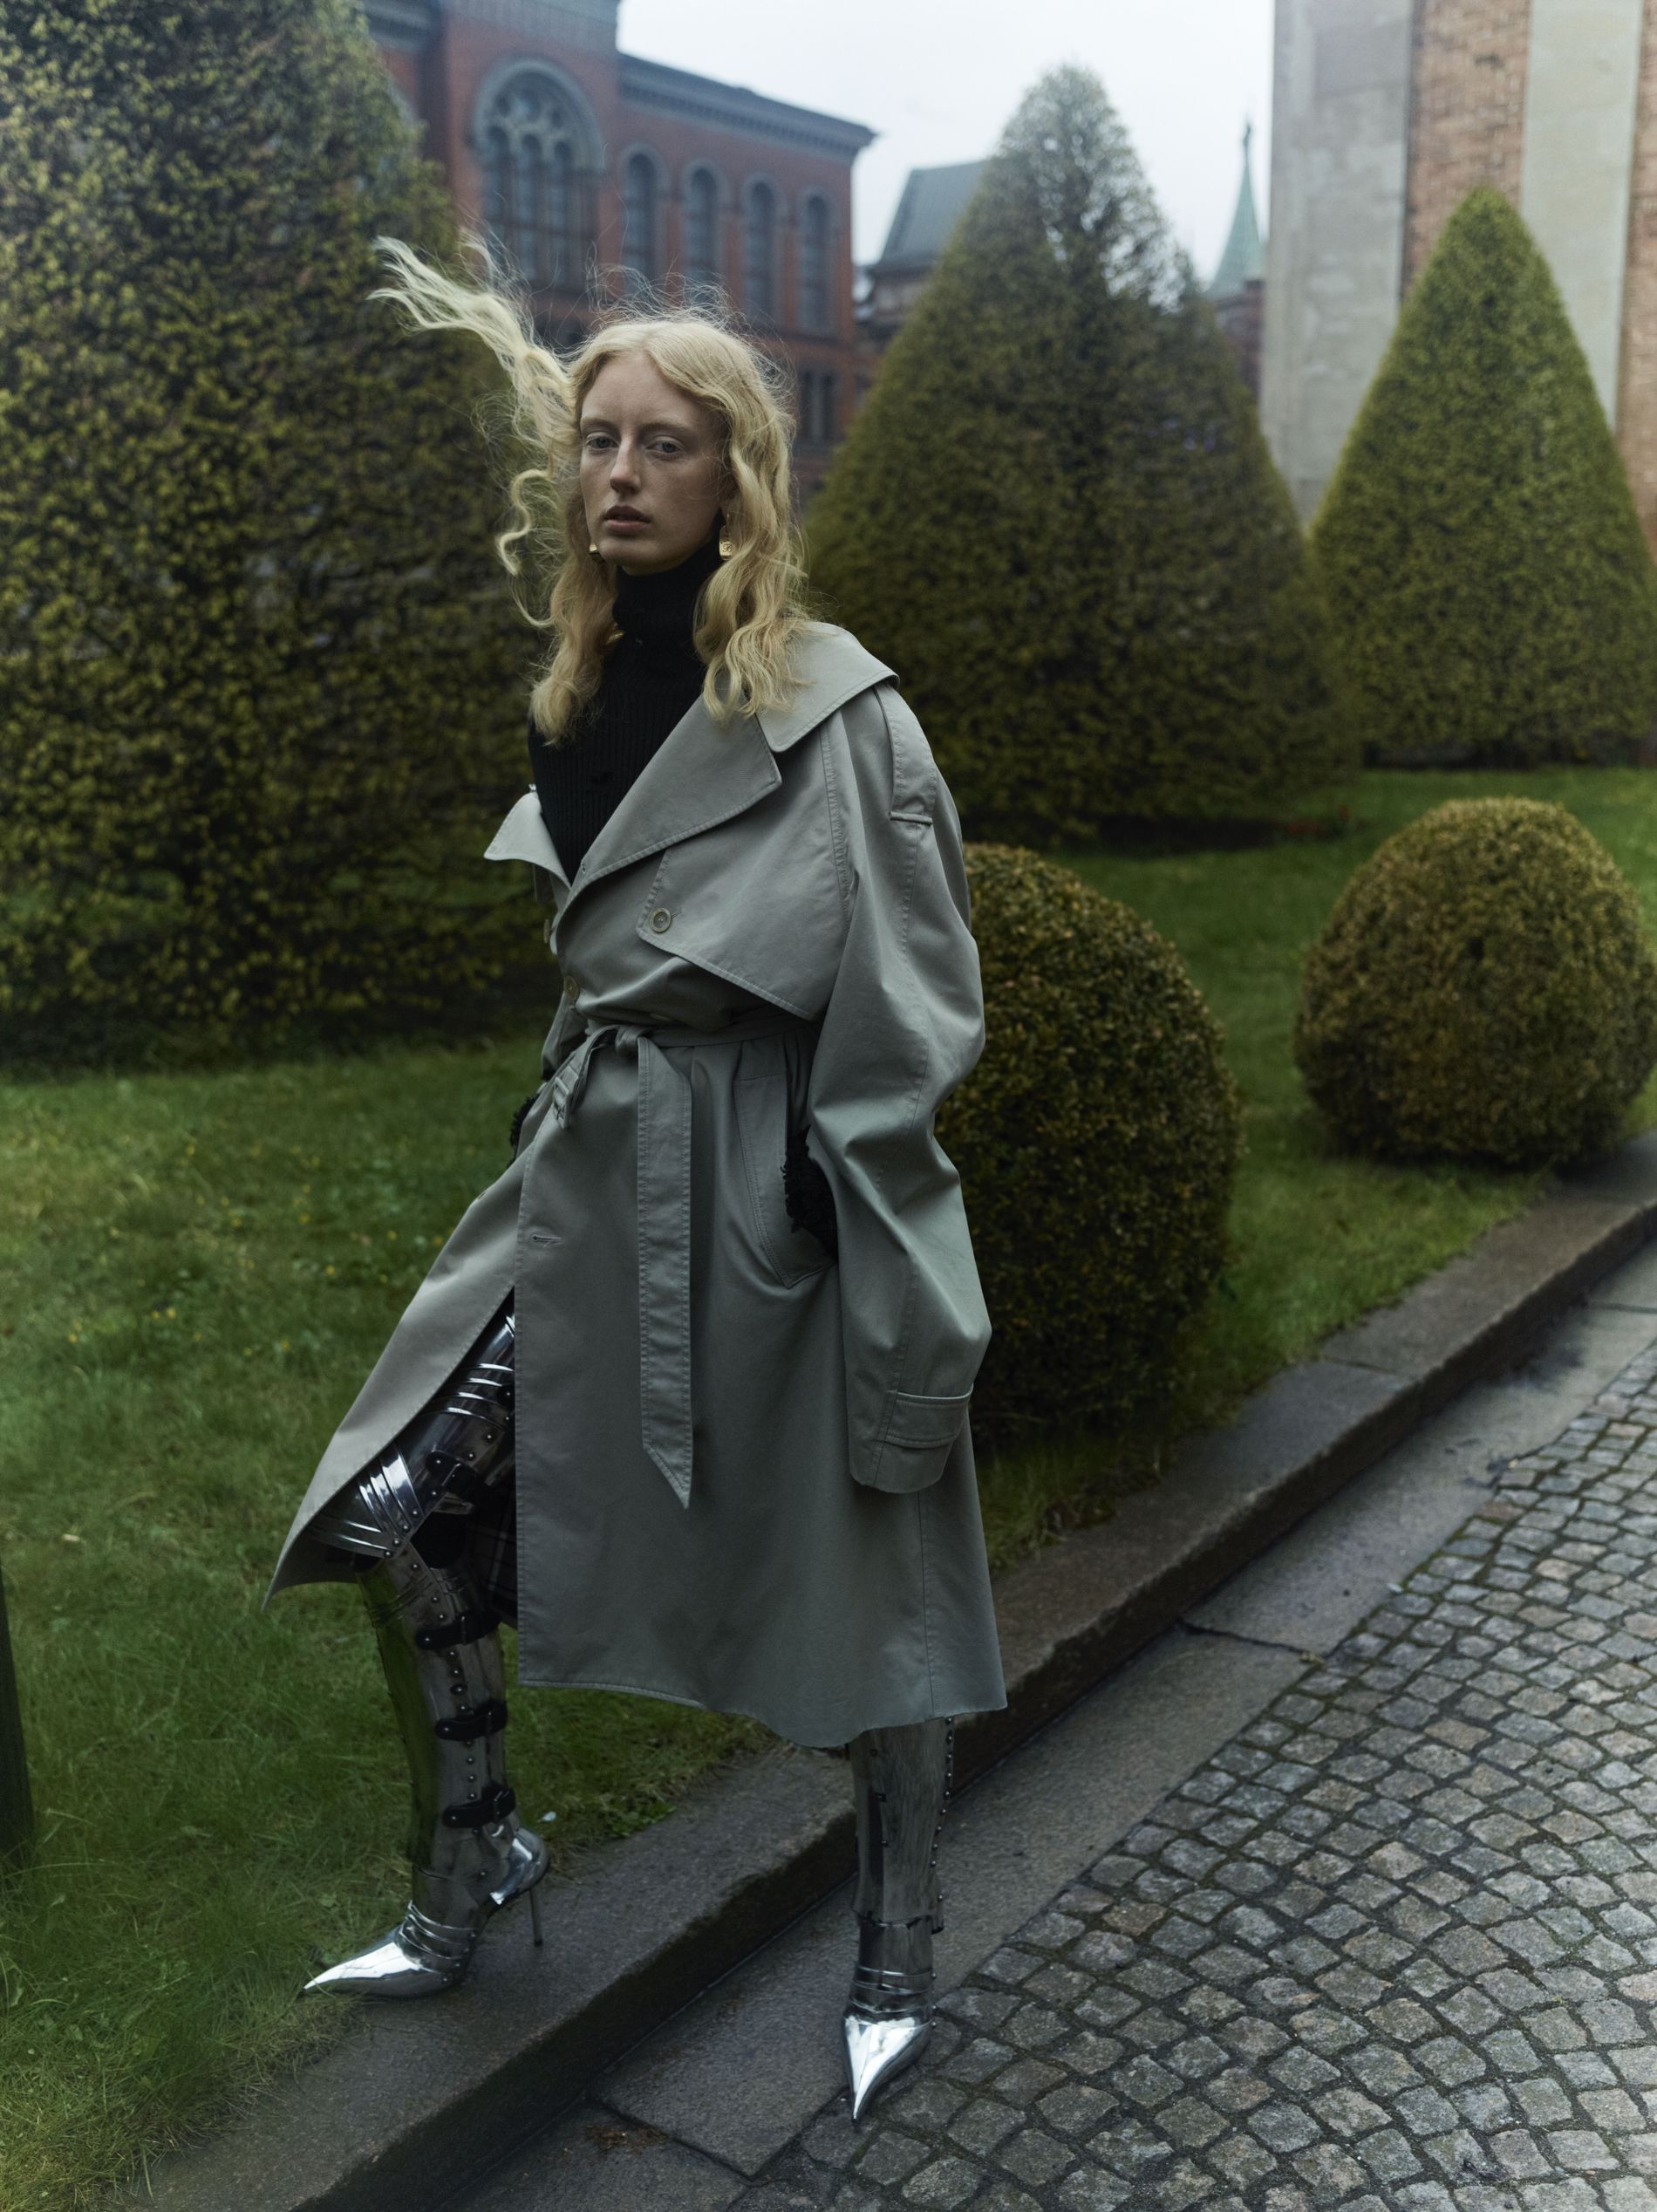 Twill trench coat, €2,390, Turtleneck, €1,090, Earrings, €495, Chevalier over-the-knee boots, €5,550. All Balenciaga.